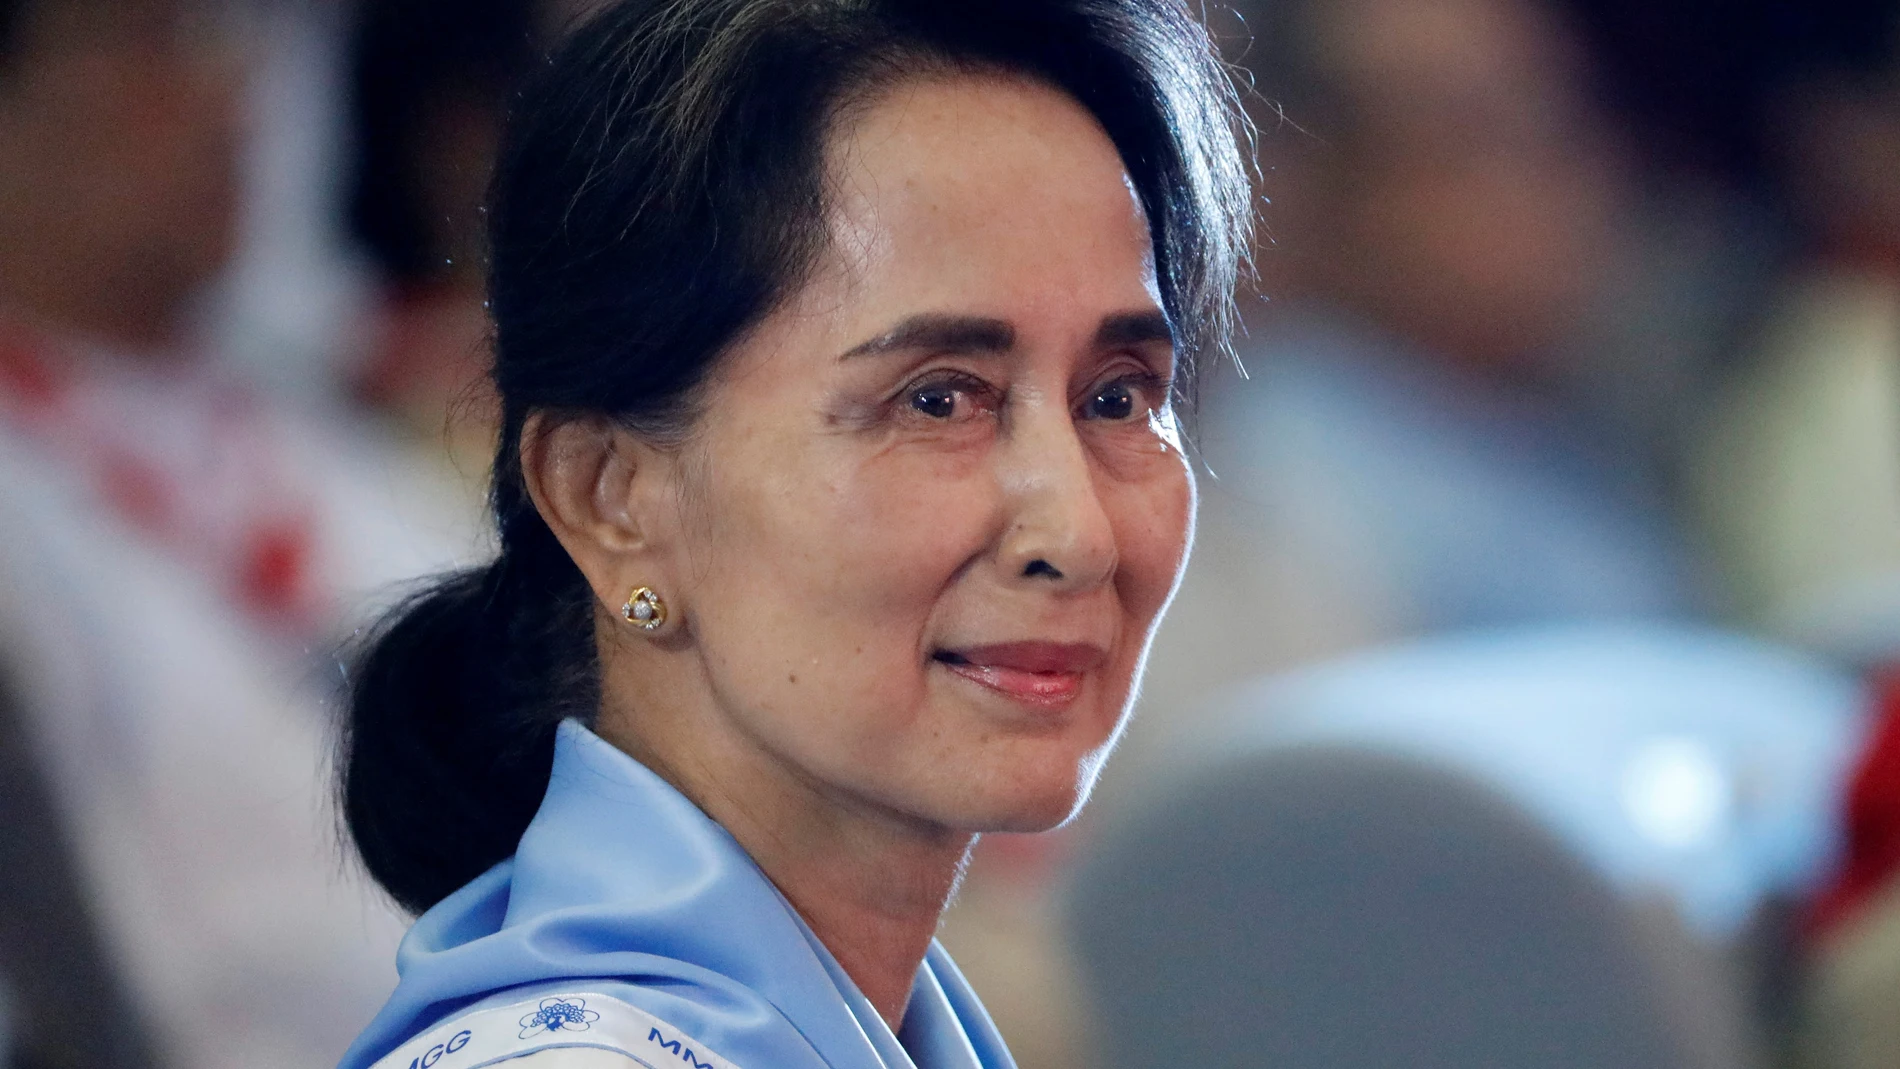 Yangon (Myanmar), 20/07/2019.- (FILE) - Myanmar State Counselor Aung San Suu Kyi wearing a Girl Scout uniform looks on during her swearing-in ceremony as chief of Myanmar scouts at the Yangon University Diamond Jubilee Hall in Yangon, Myanmar, 20 July 2019 (reissued 10 January 2022). Myanmar'Äôs ousted civilian leader Aung San Suu Kyi has been convicted of three criminal charges and sentenced to four years in prison in the second round of verdicts handed out by a court on 10 January 2022. (Birmania) EFE/EPA/NYEIN CHAN NAING